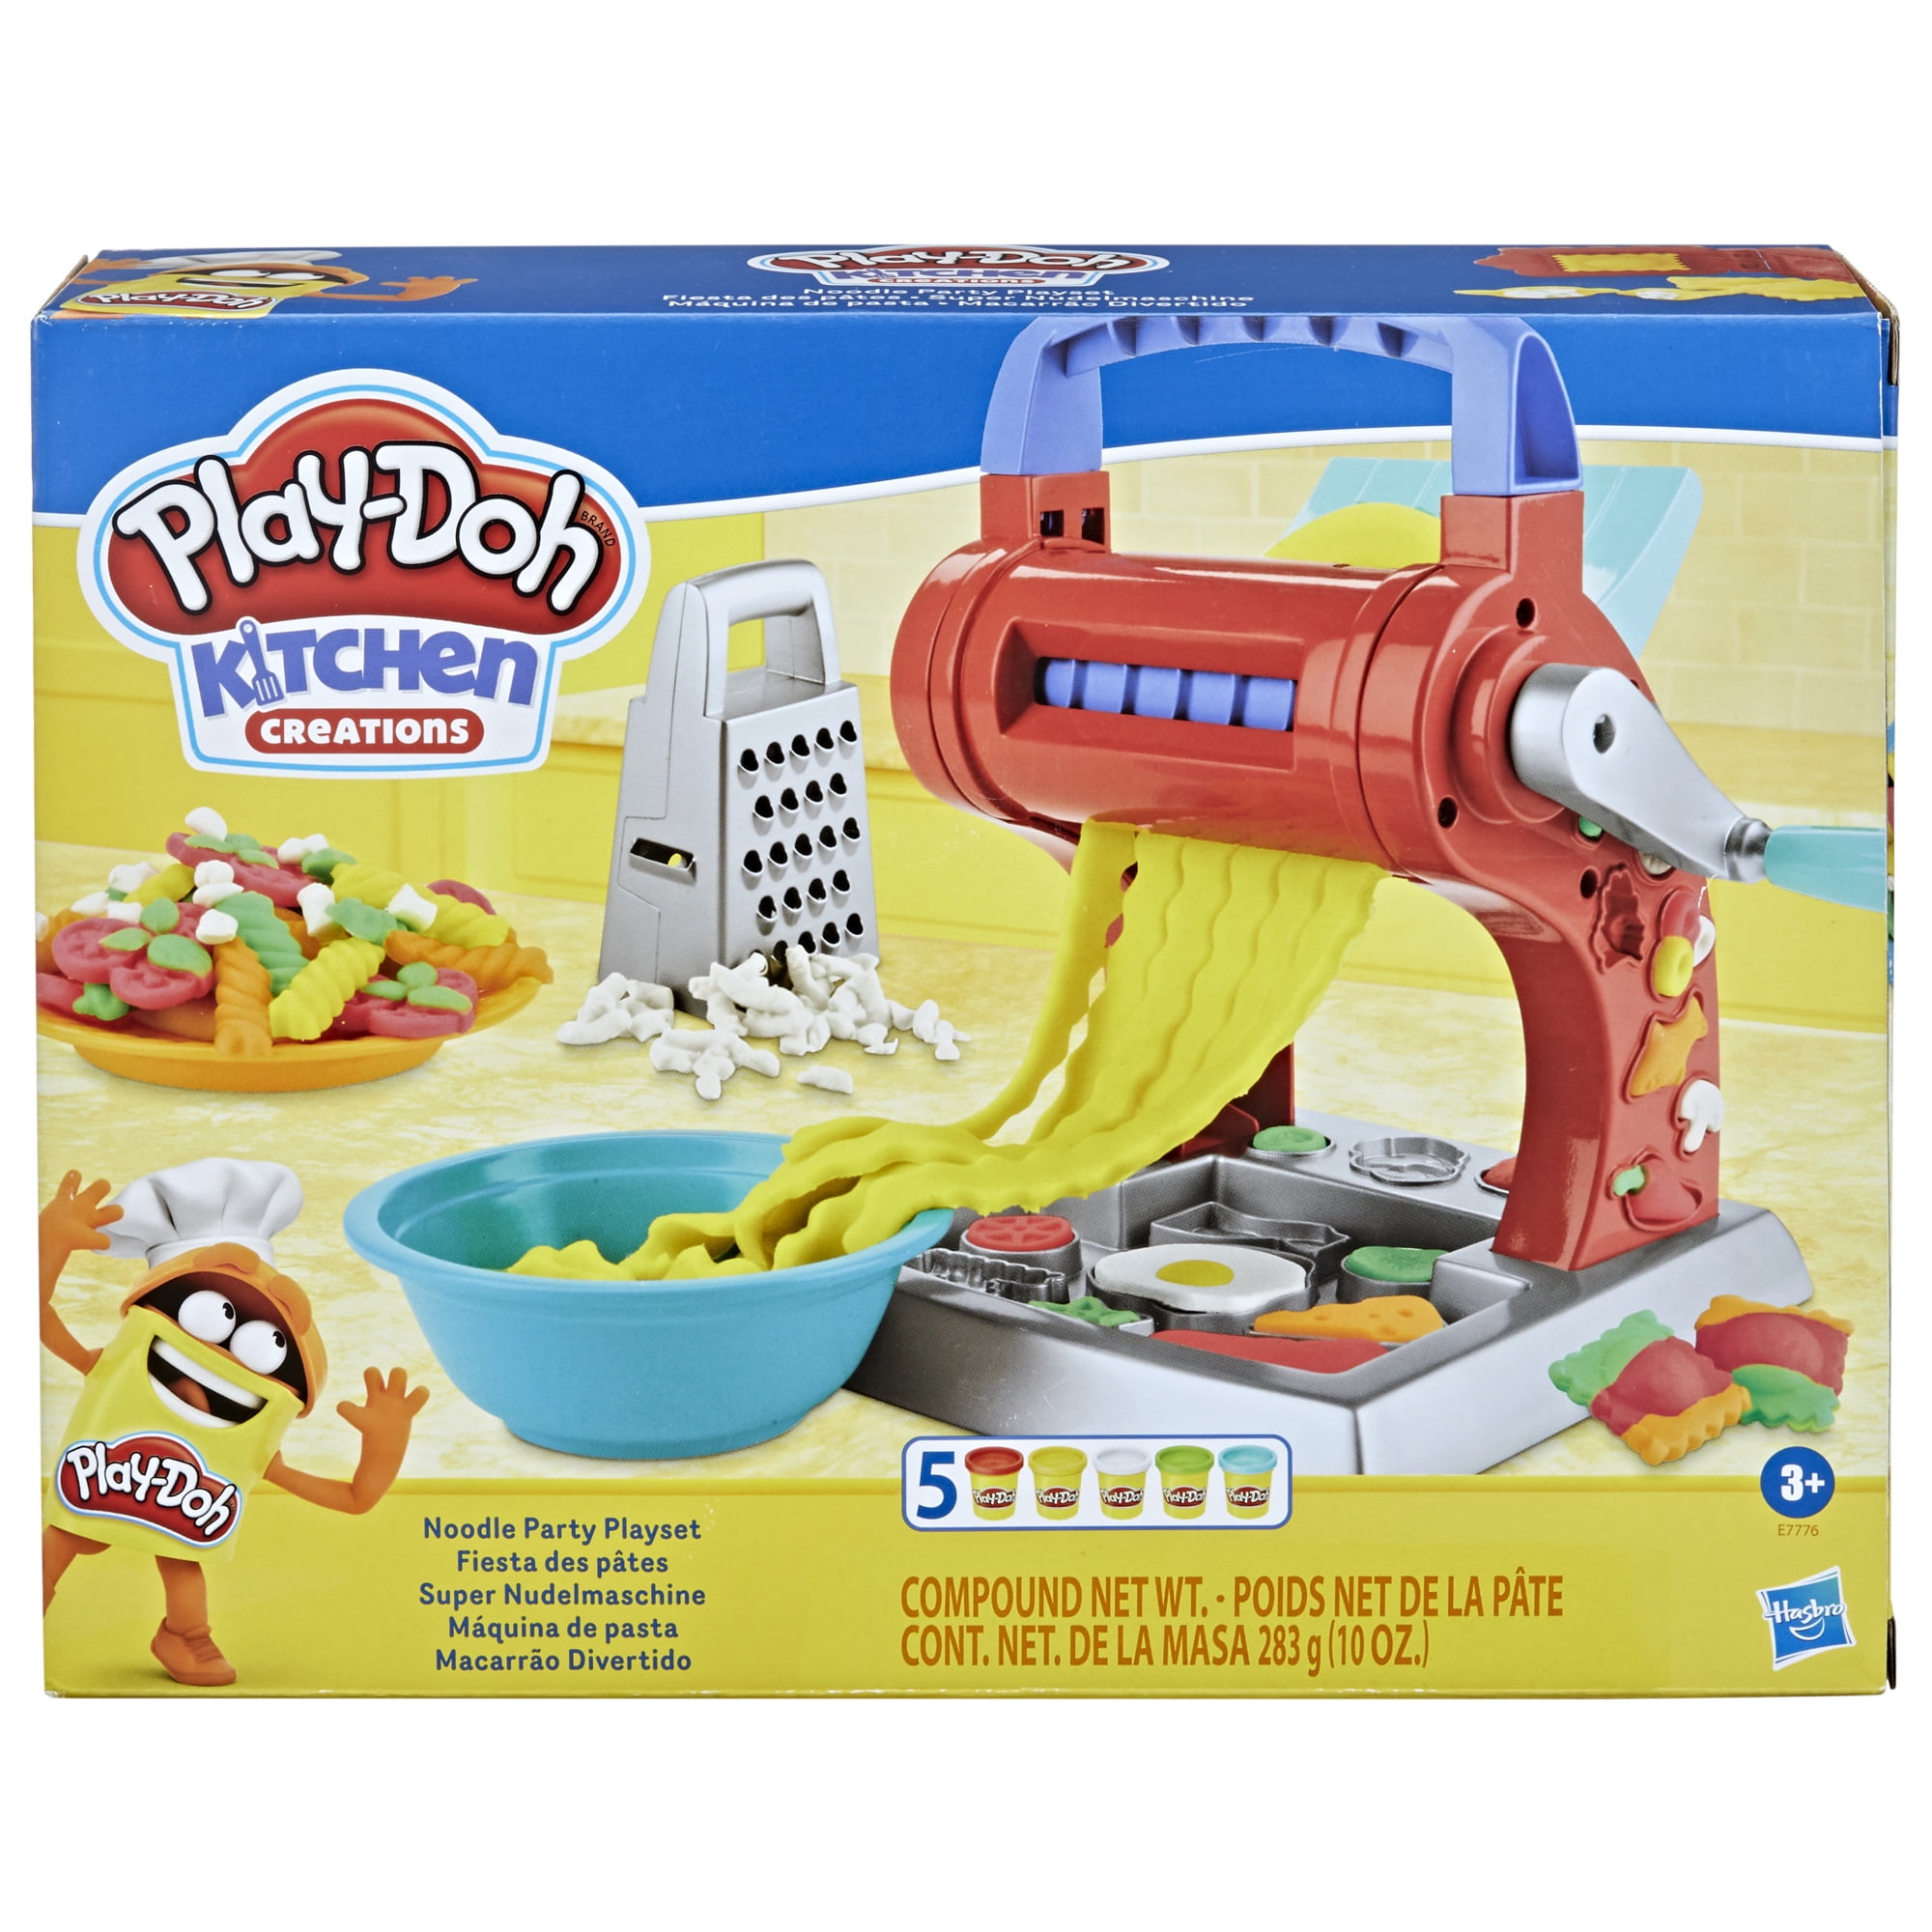 Dear Deer Color Dough Kitchen Creations Play Set, Noodle Maker Ice Cream  Party Favors Dough Playset for Kids Ages 2-4 4-8, Handmade DIY Spaghetti